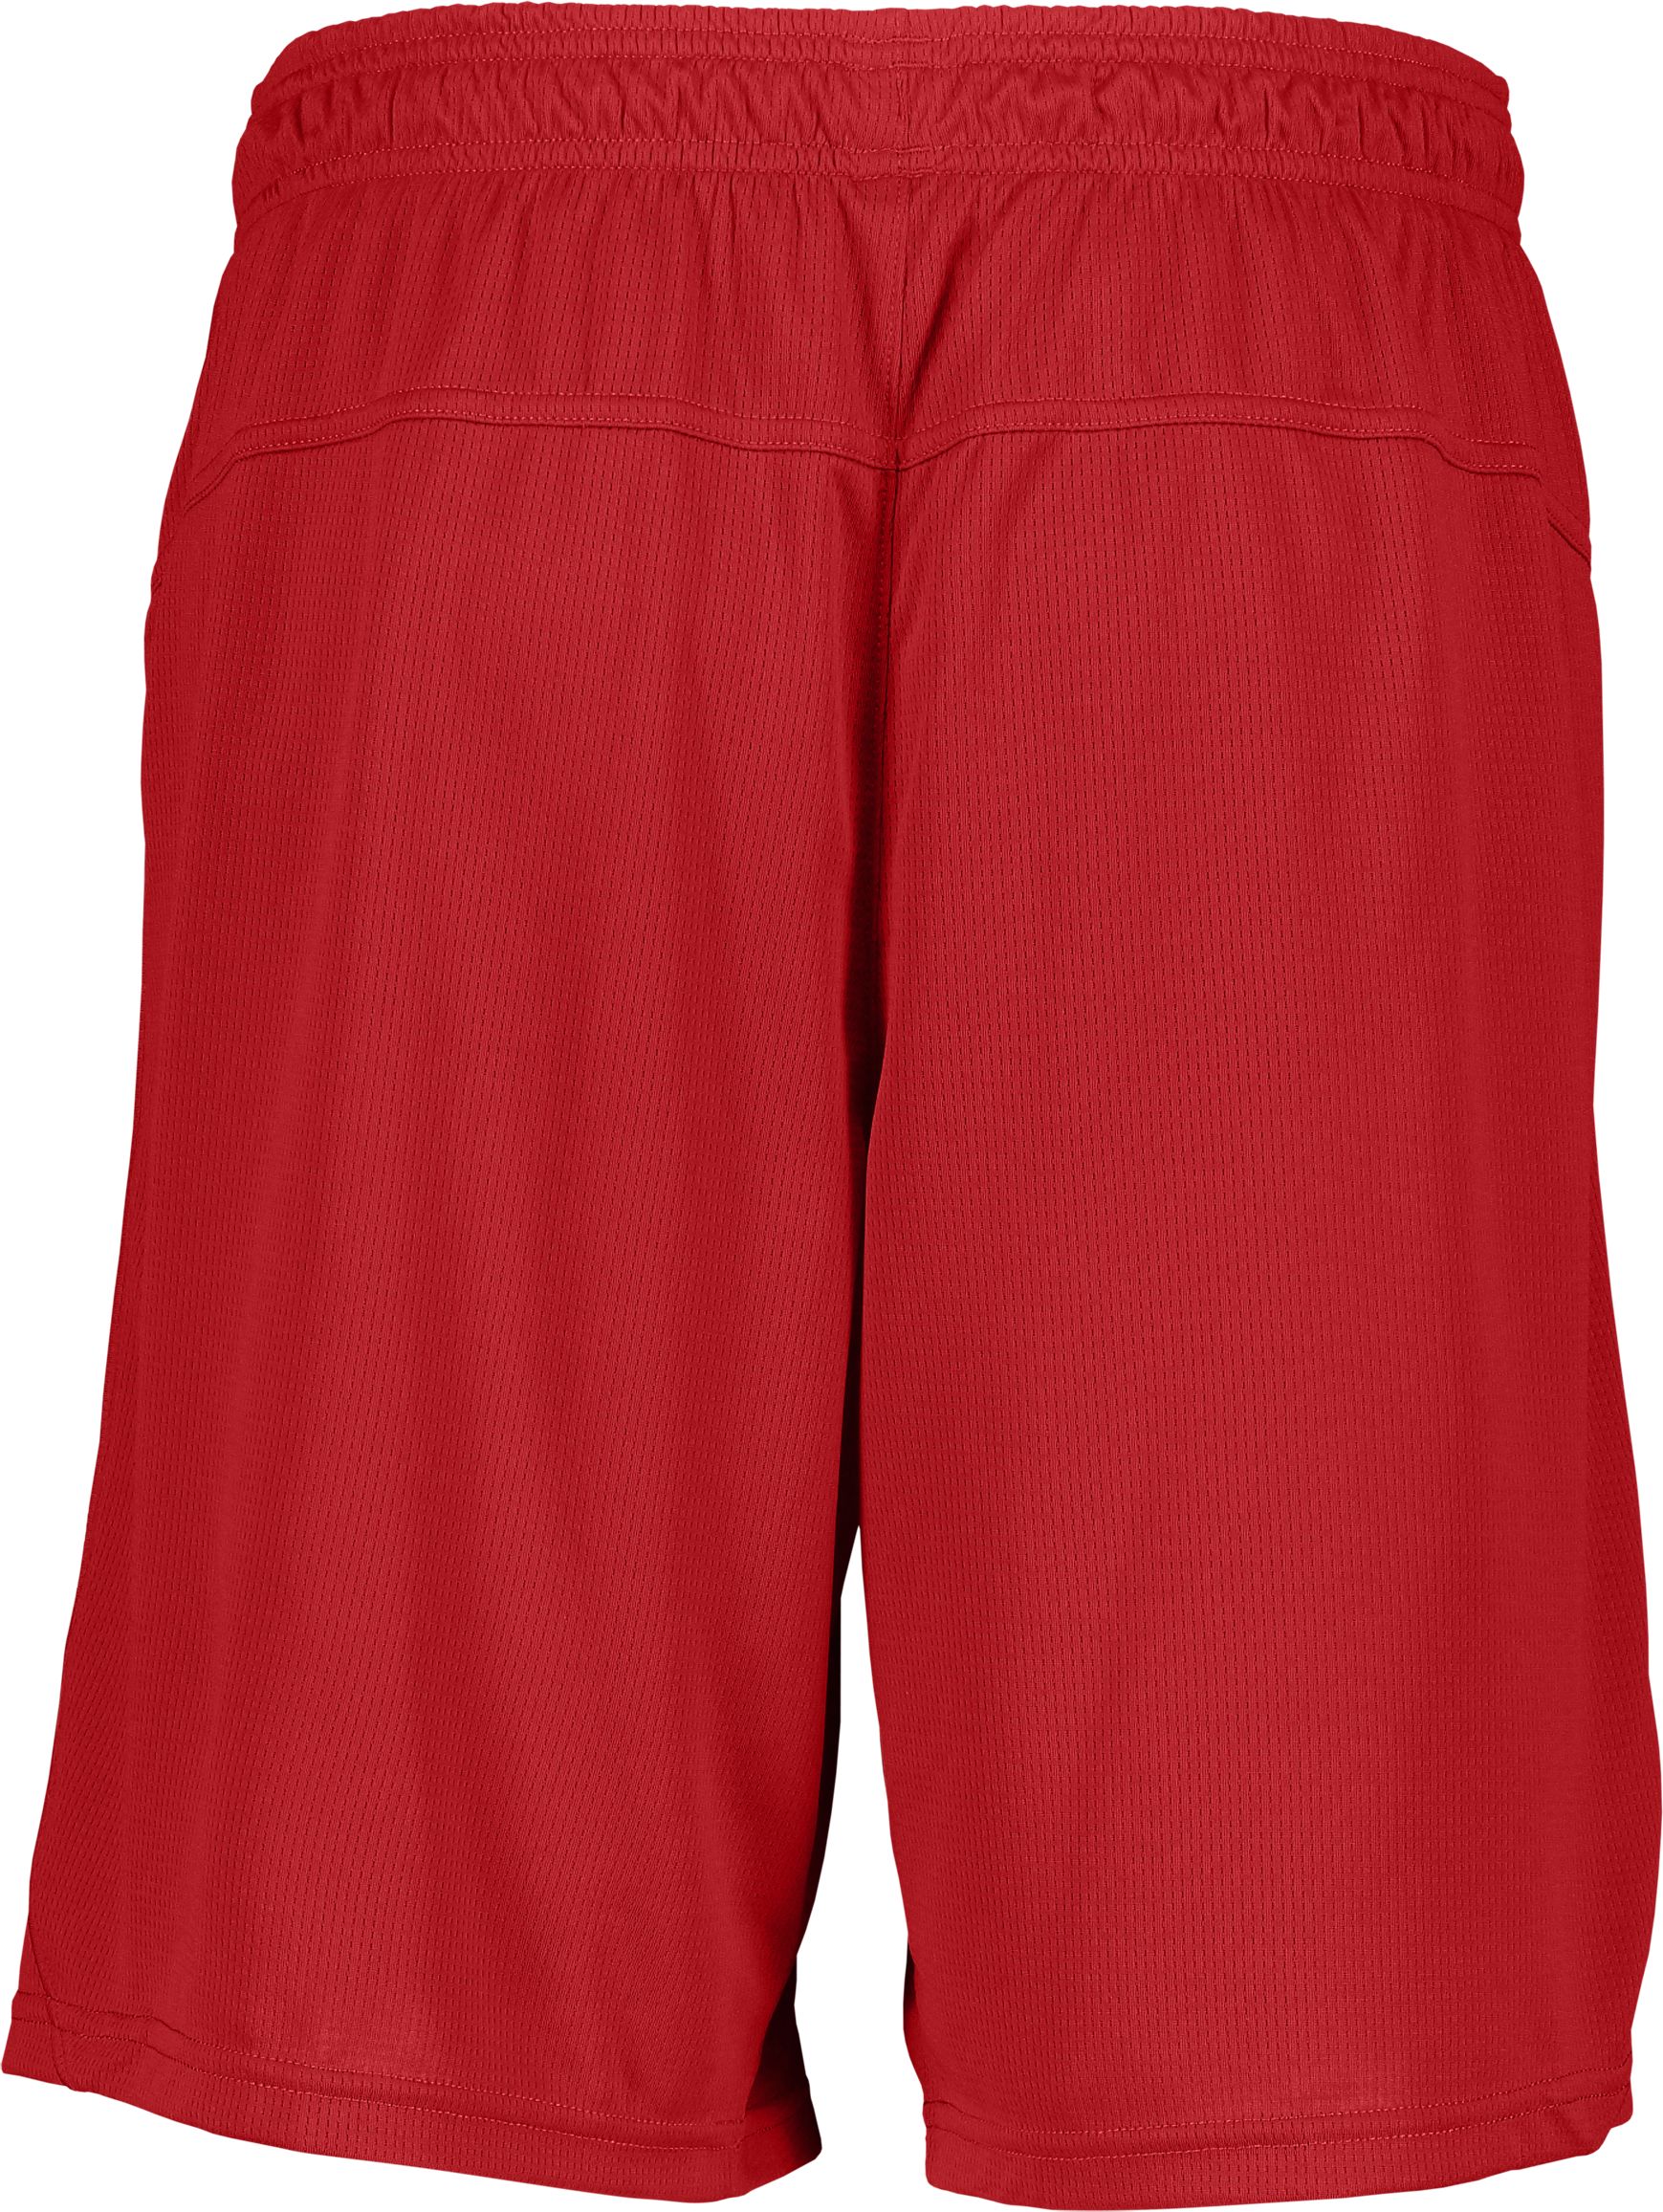 FATPIPE, GEIR PL SHORTS